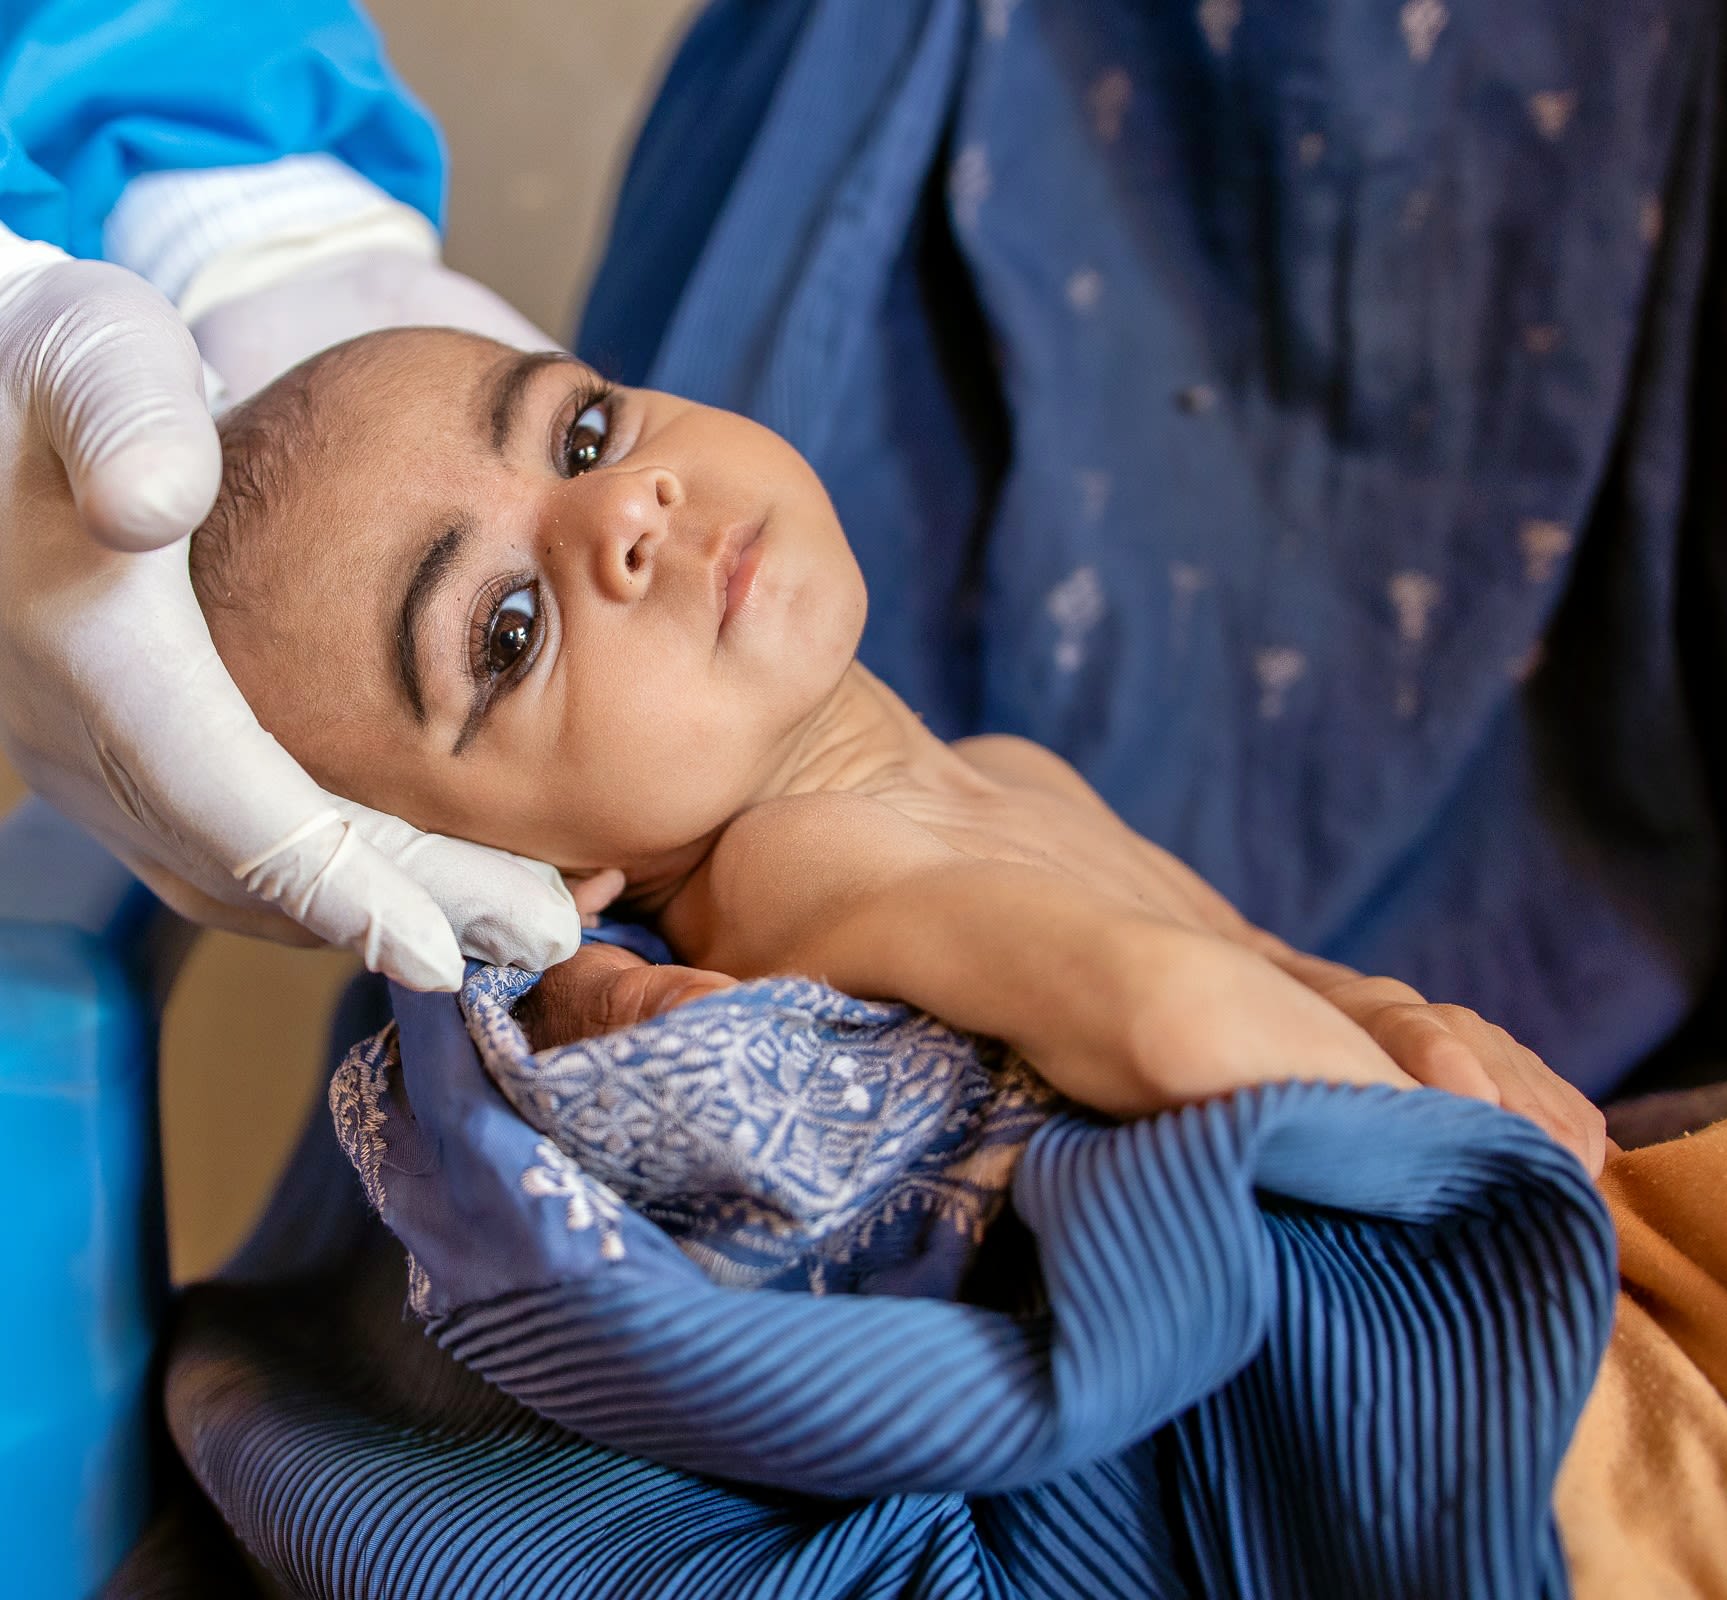 Temor's sister, Samera* (7 months), is receiving treatment for severe acute malnutrition at a Save the Children mobile clinic in Afghanistan